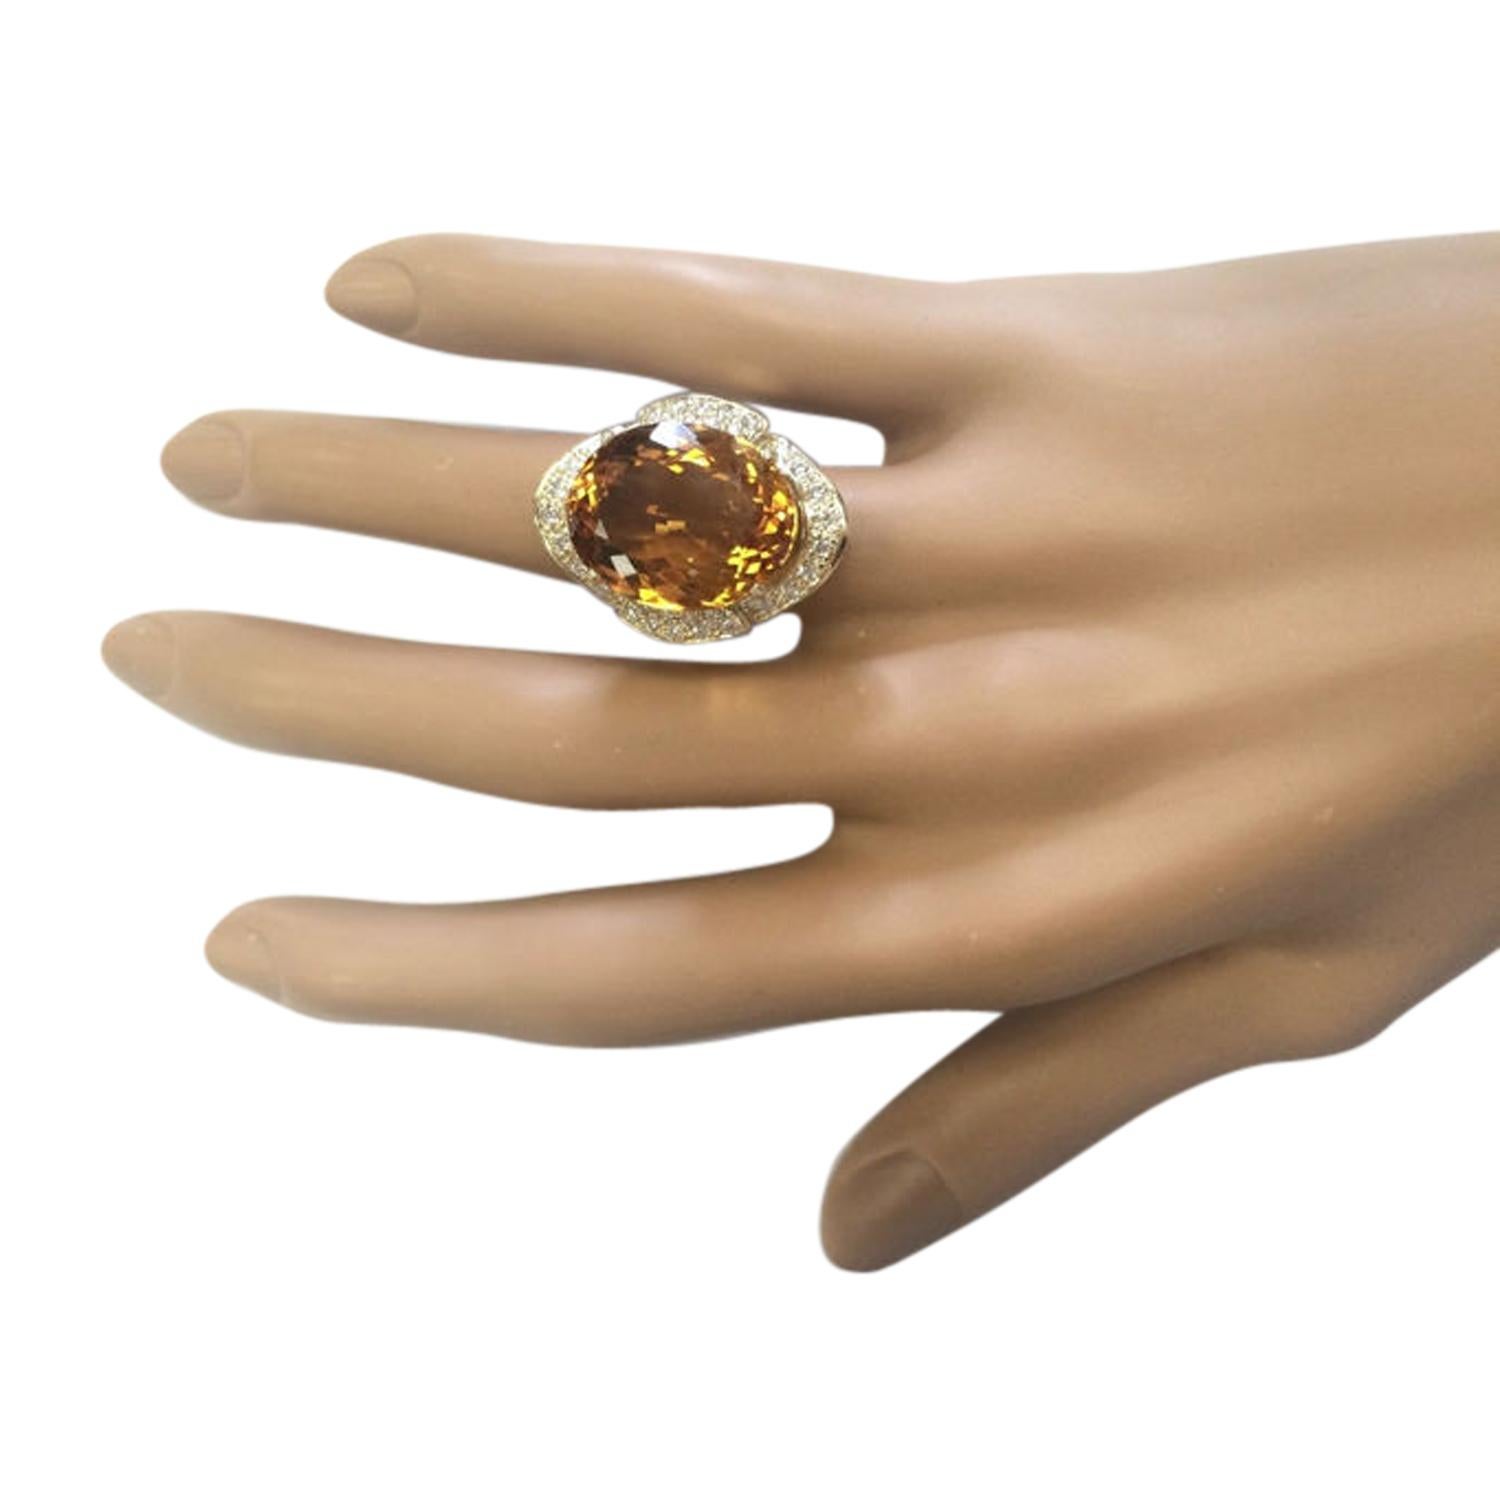 17.06 Carat Natural Citrine 14 Karat Solid Yellow Gold Diamond Ring
Stamped: 14K 
Total Ring Weight: 7 Grams 
Citrine Weight: 16.46 Carat (18.00x13.00 Millimeters) 
Diamond Weight: 0.60 Carat (F-G Color, VS2-SI1 Clarity )
Diamond Quantity: 34
Face